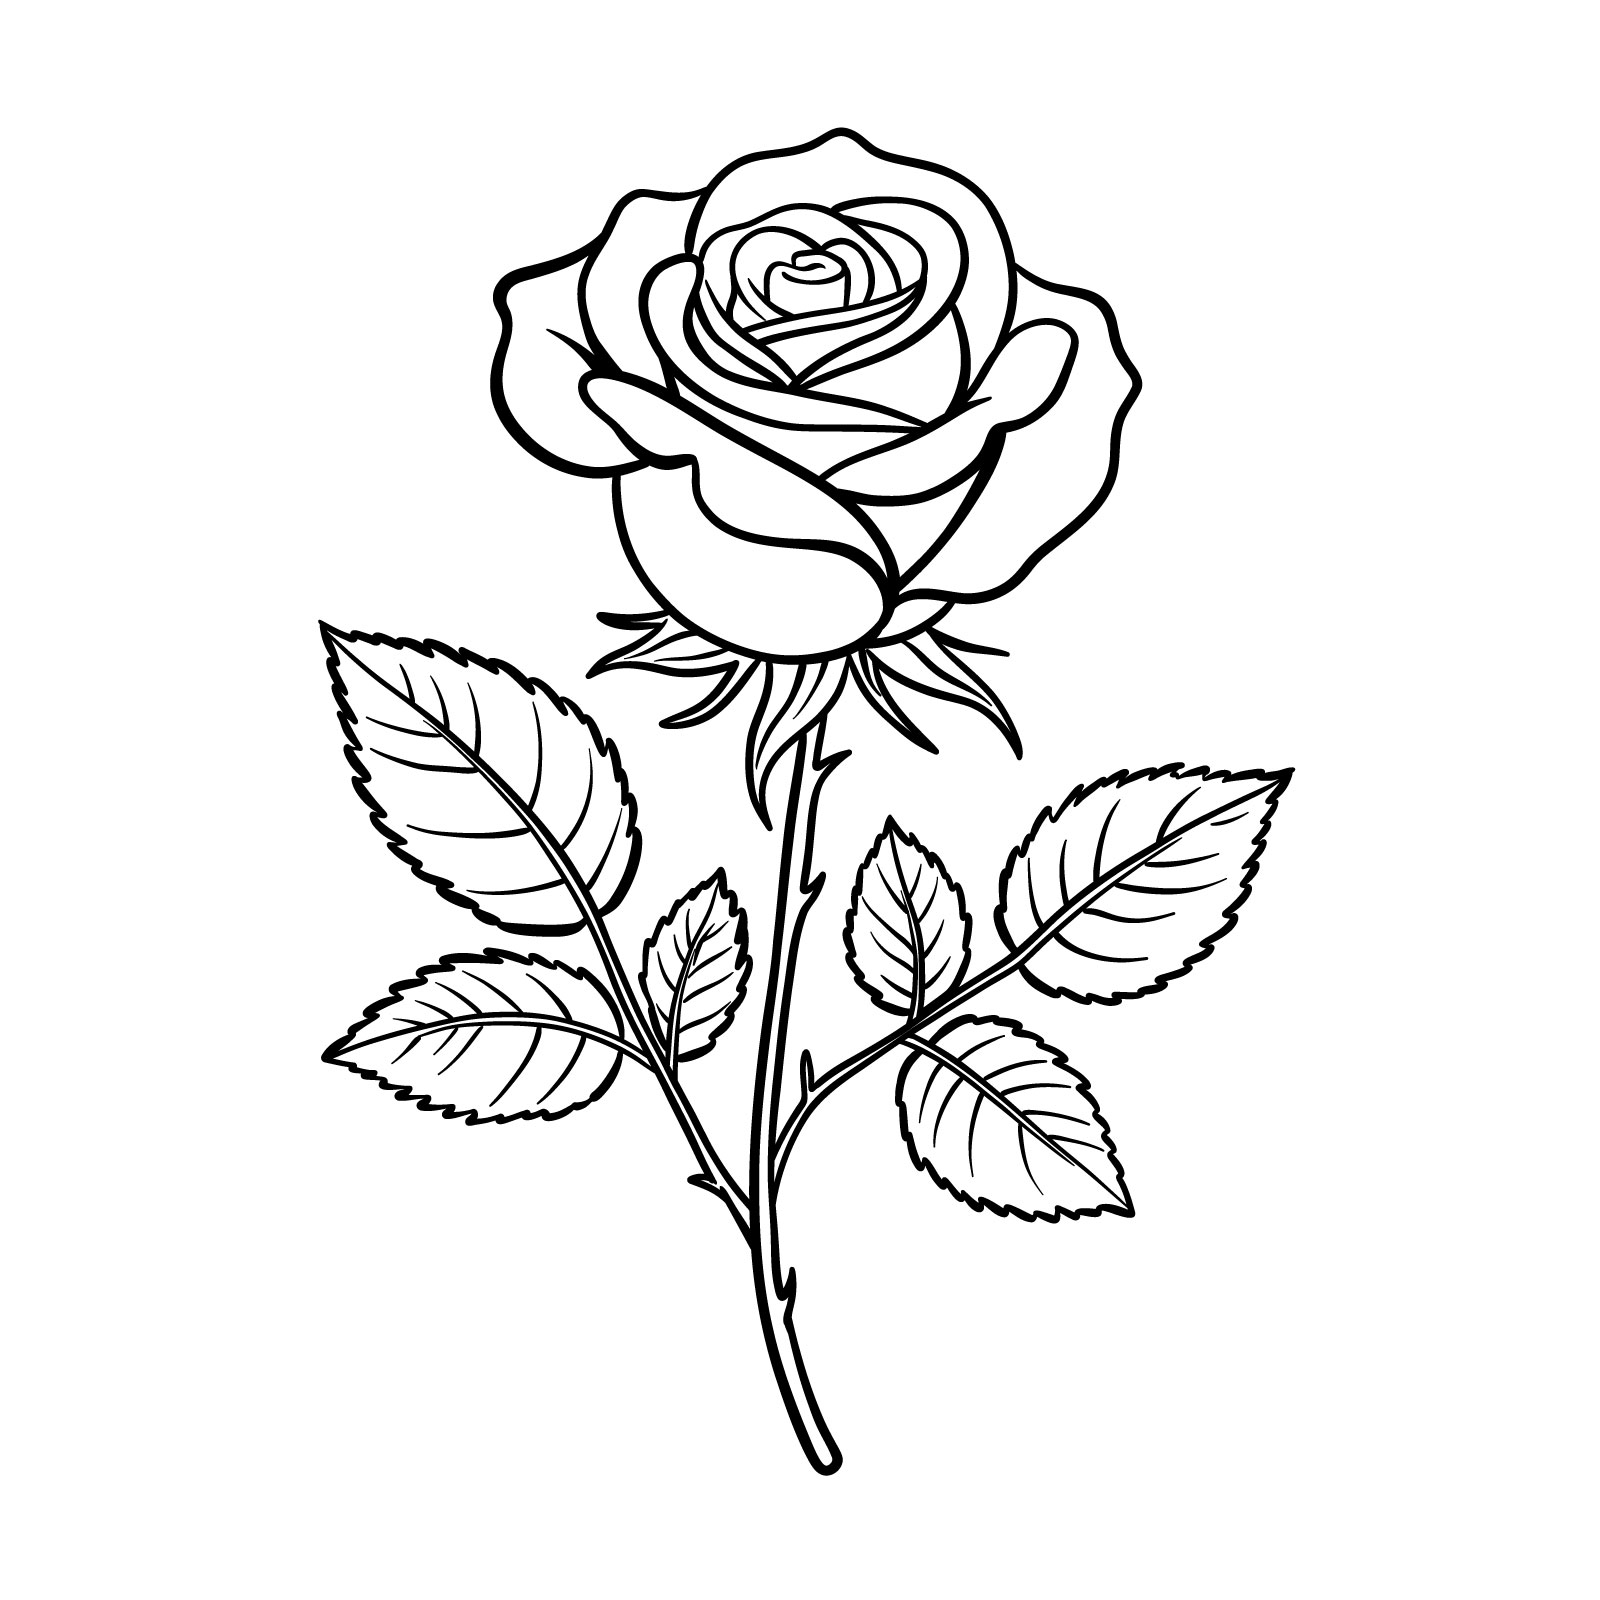 Rose drawing. How to draw a rose. Realistic rose drawing. - YouTube